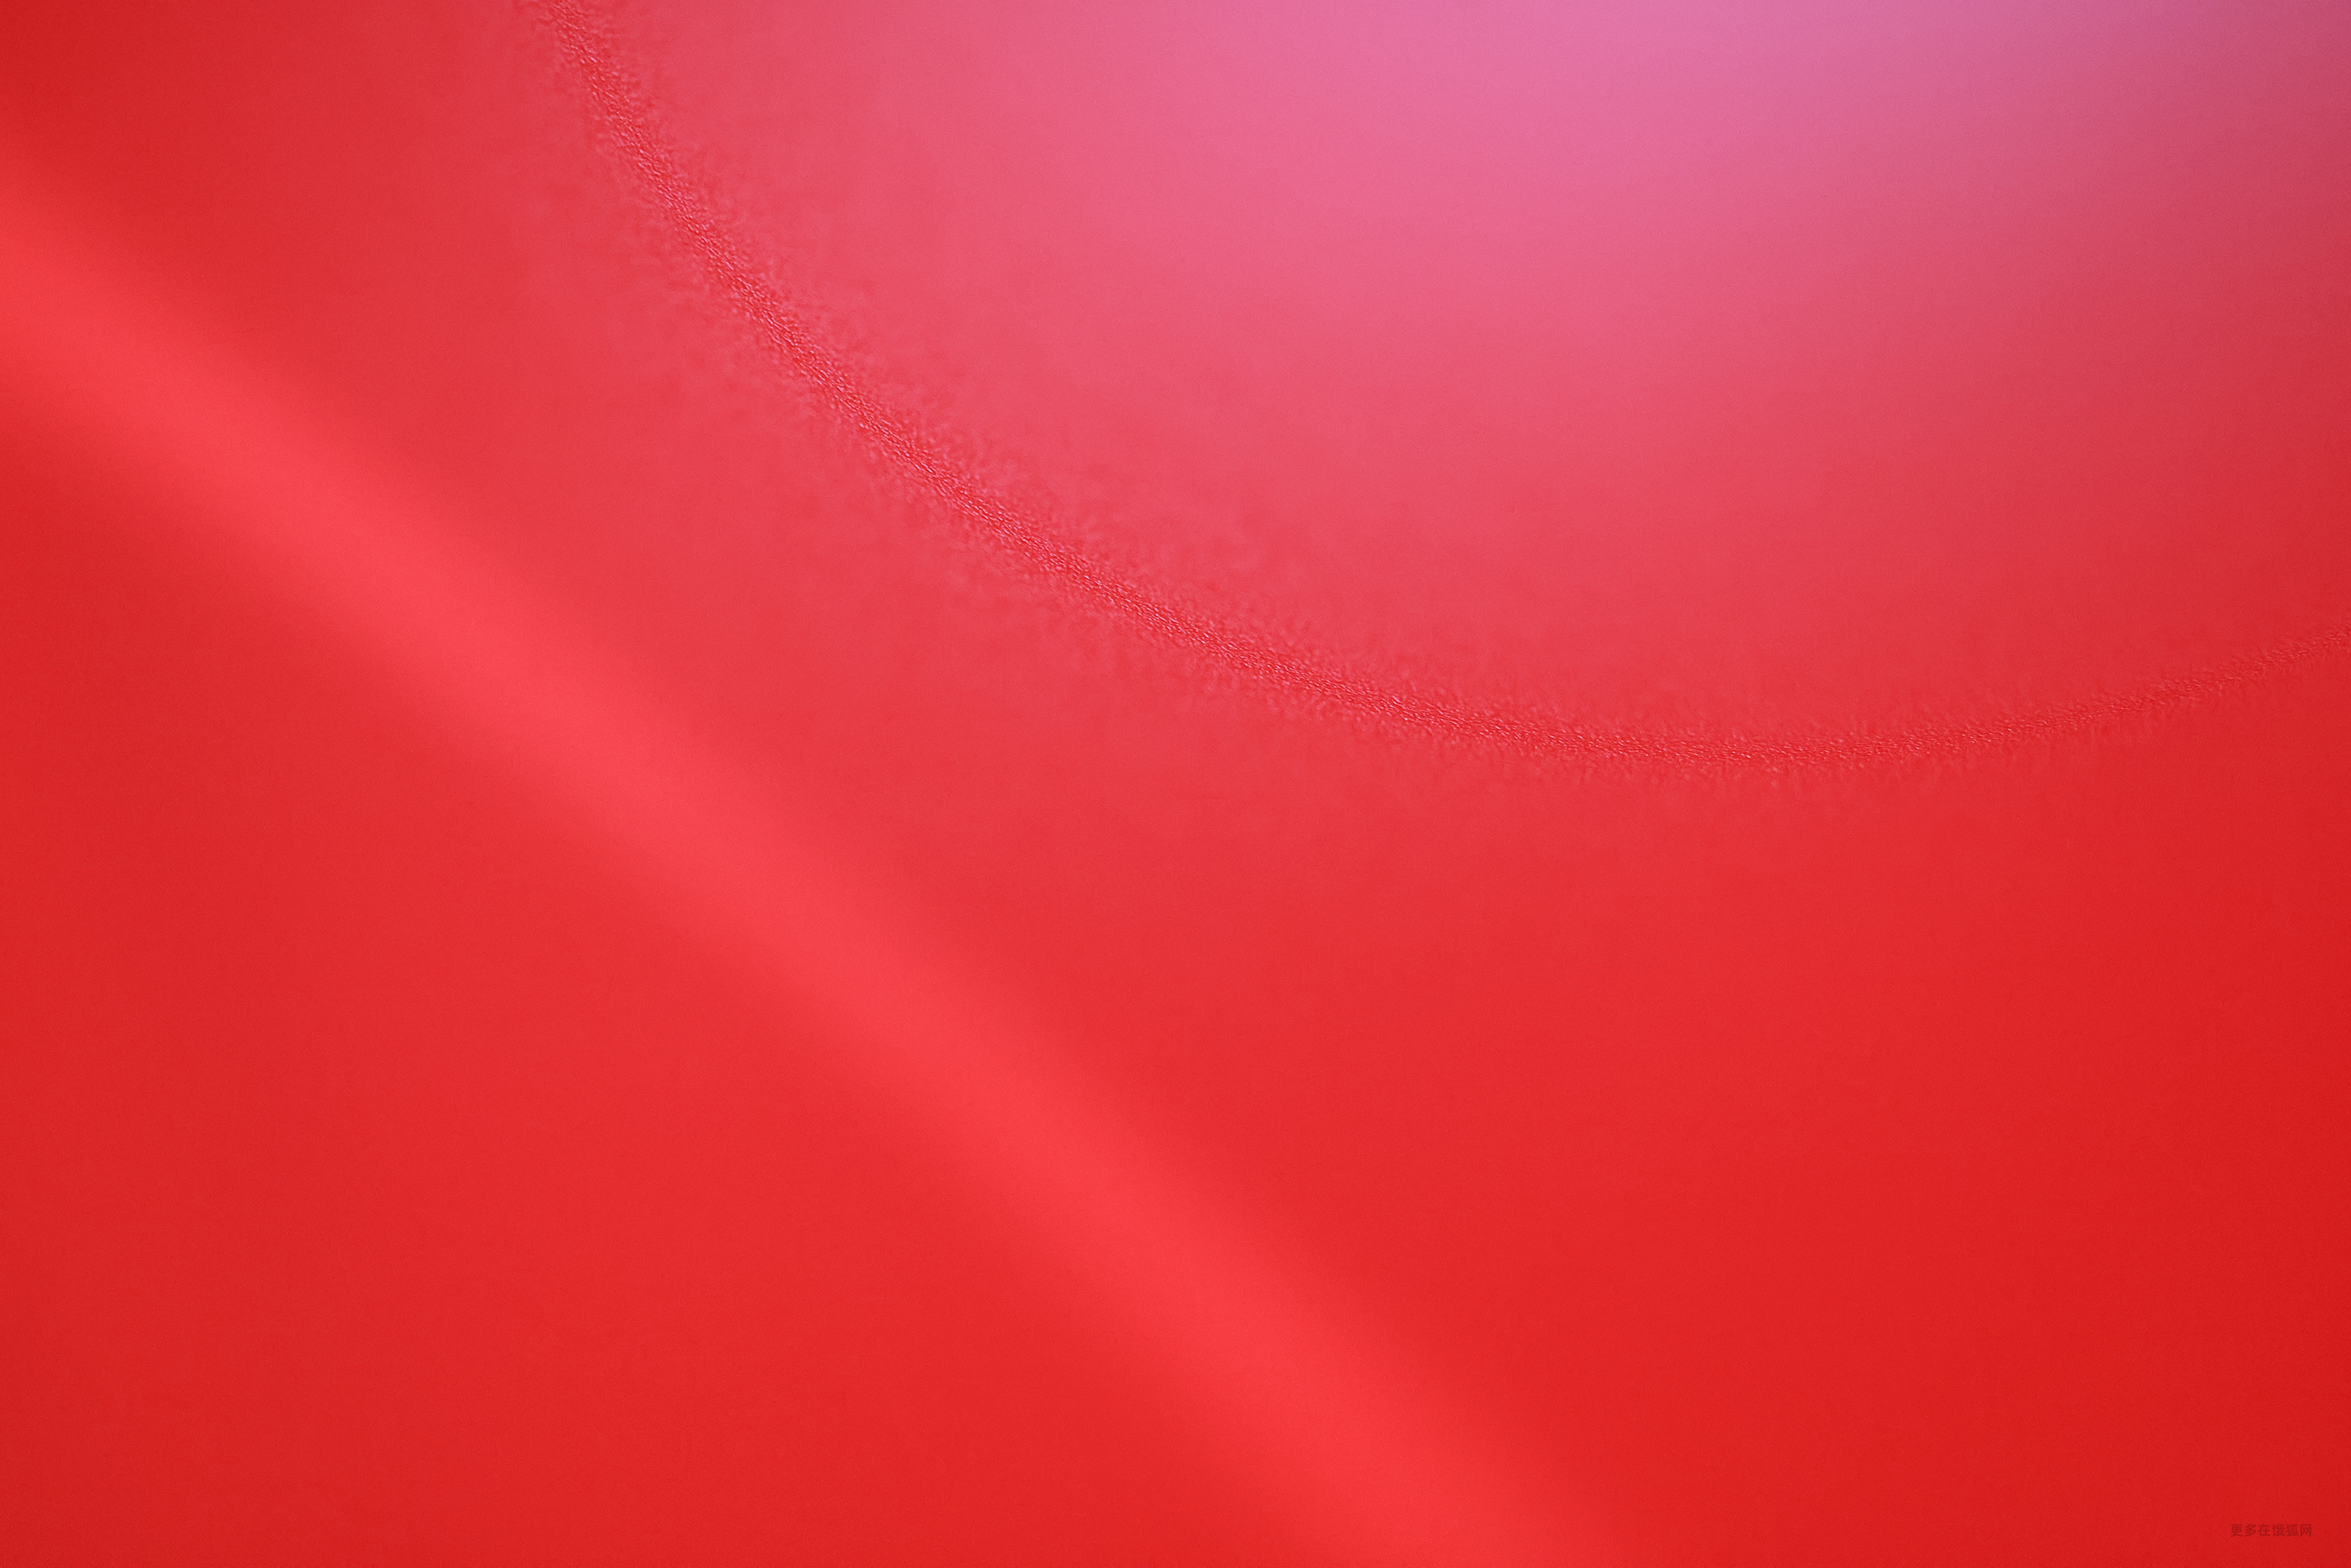 General 3001x2002 red background abstract 3D Abstract red